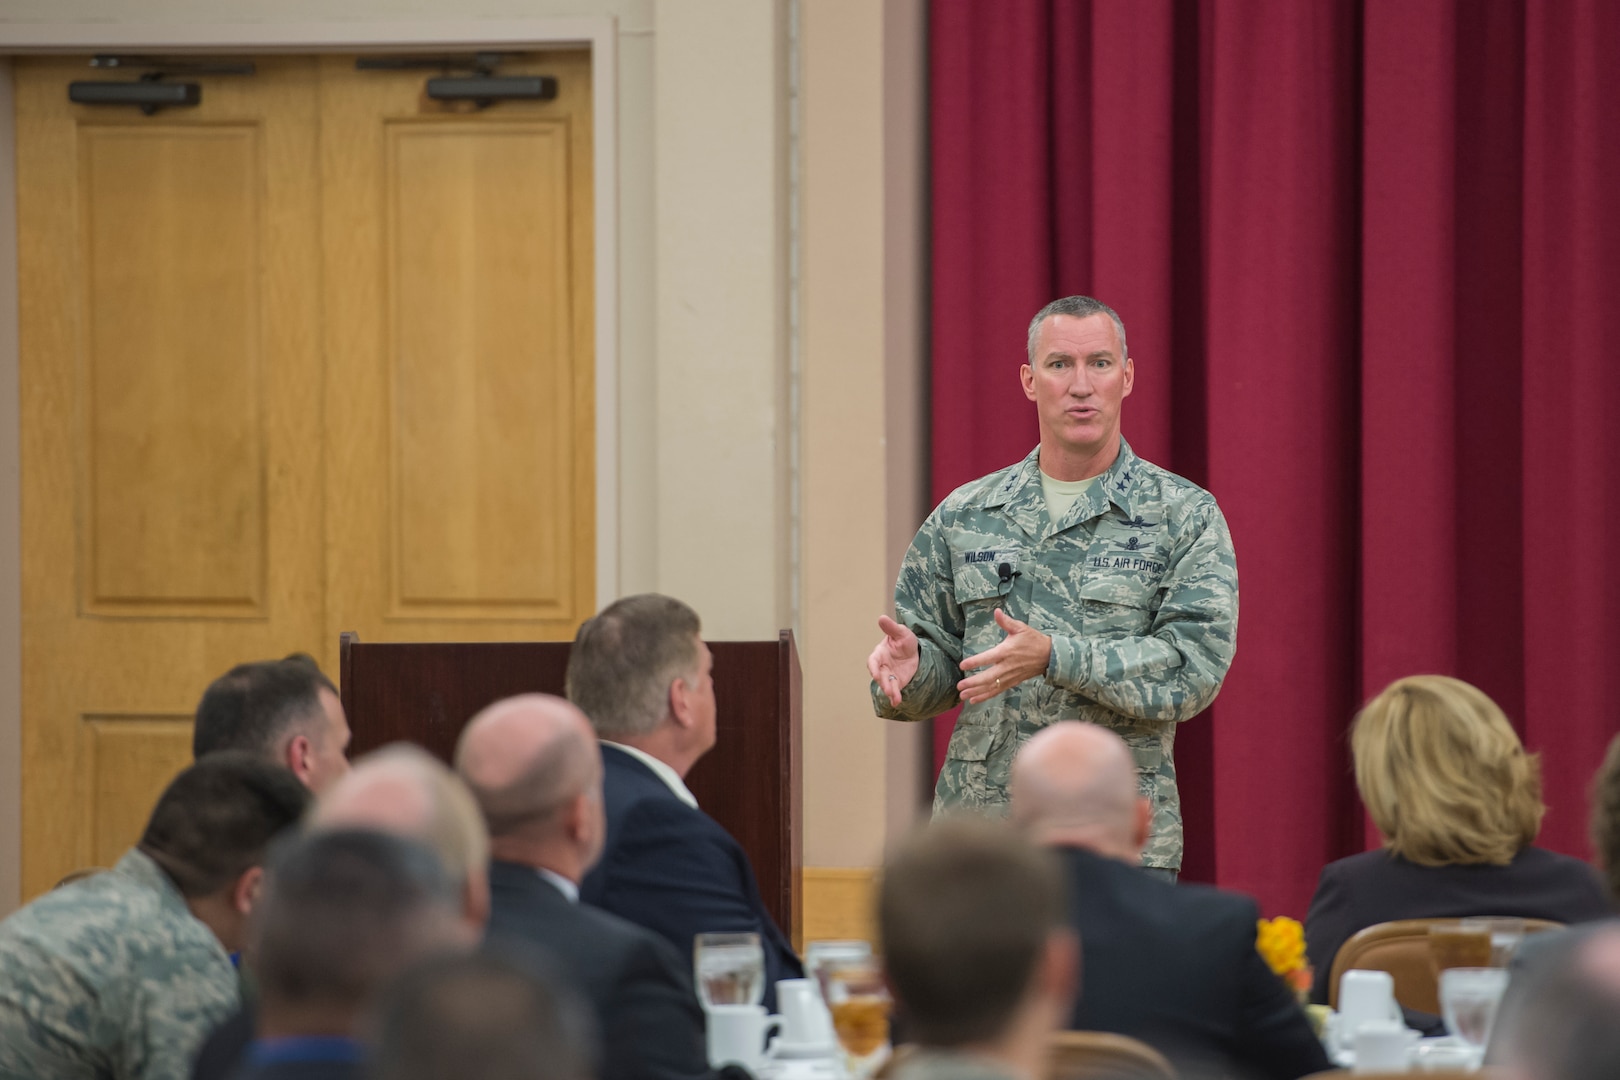 Maj. Gen. Ed Wilson, 24th Air Force commander speaks to attendees of the 2015 AF Cyberspace Live, Virtual and Constructive (LVC) Workshop on Joint Base San Antonio - Lackland, Texas, October 20. The three-day LVC workshop is co-chaired by 24 AF and the Air Force Agency for Modeling and Simulation (AFAMS). The theme of the workshop is Training the Cyber Mission Force. As the leader in realistic Cyber training, the AF seeks to integrate air, space, and cyberspace training through its full-spectrum LVC capabilities. (U.S. Air Force photo by Master Sgt. Luke P. Thelen/Released)
